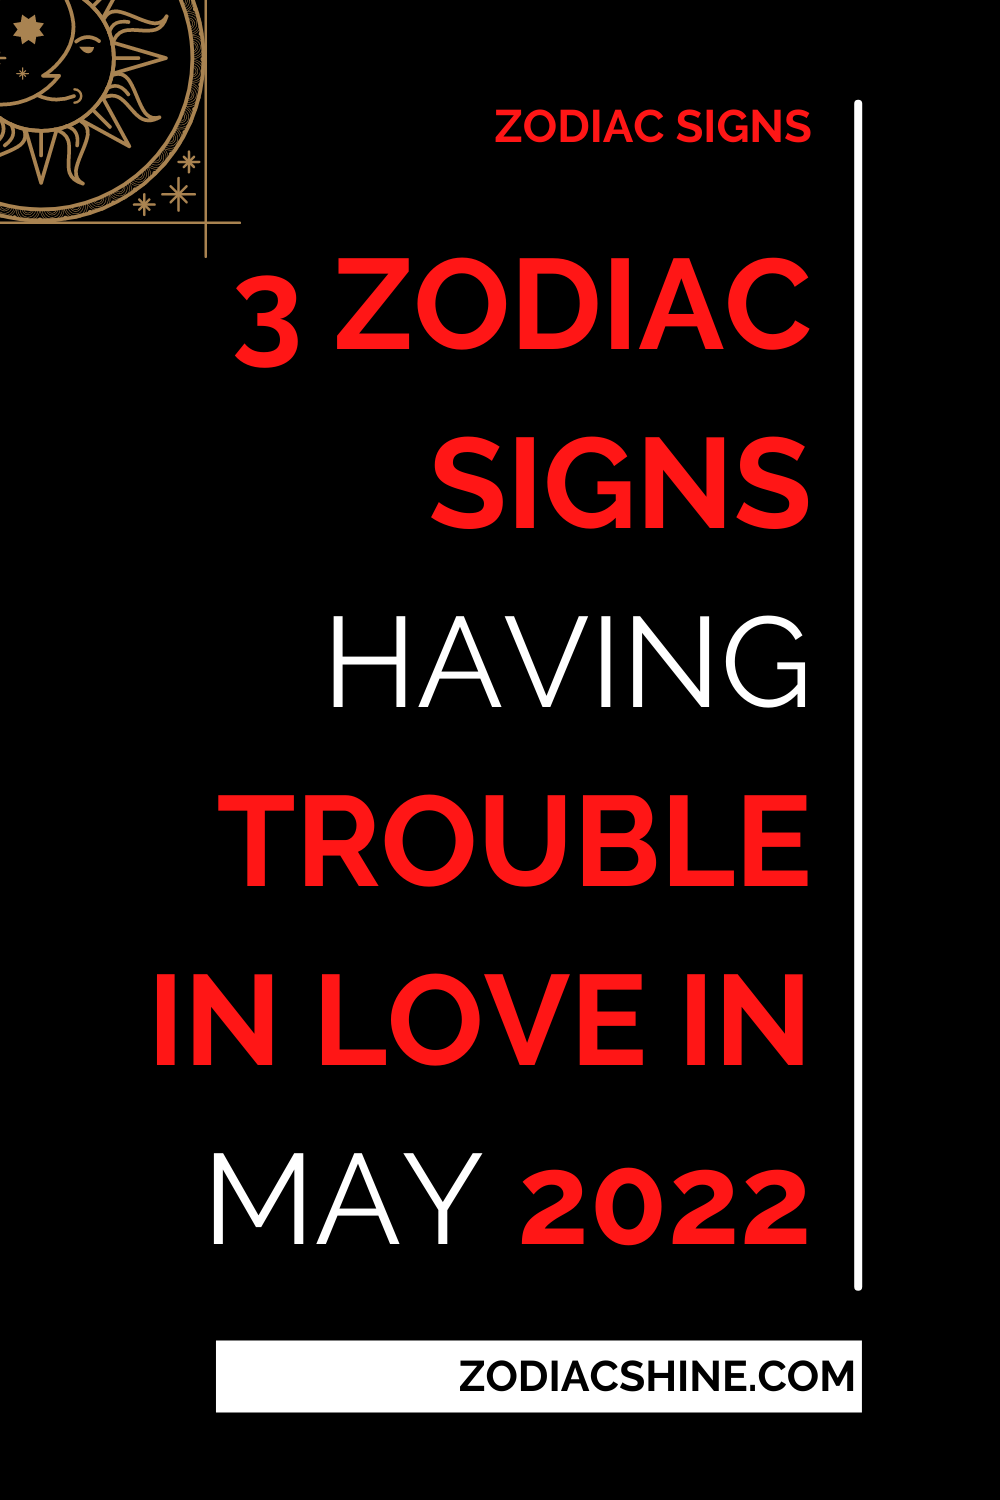 3 Zodiac Signs Having Trouble In Love In May 2022